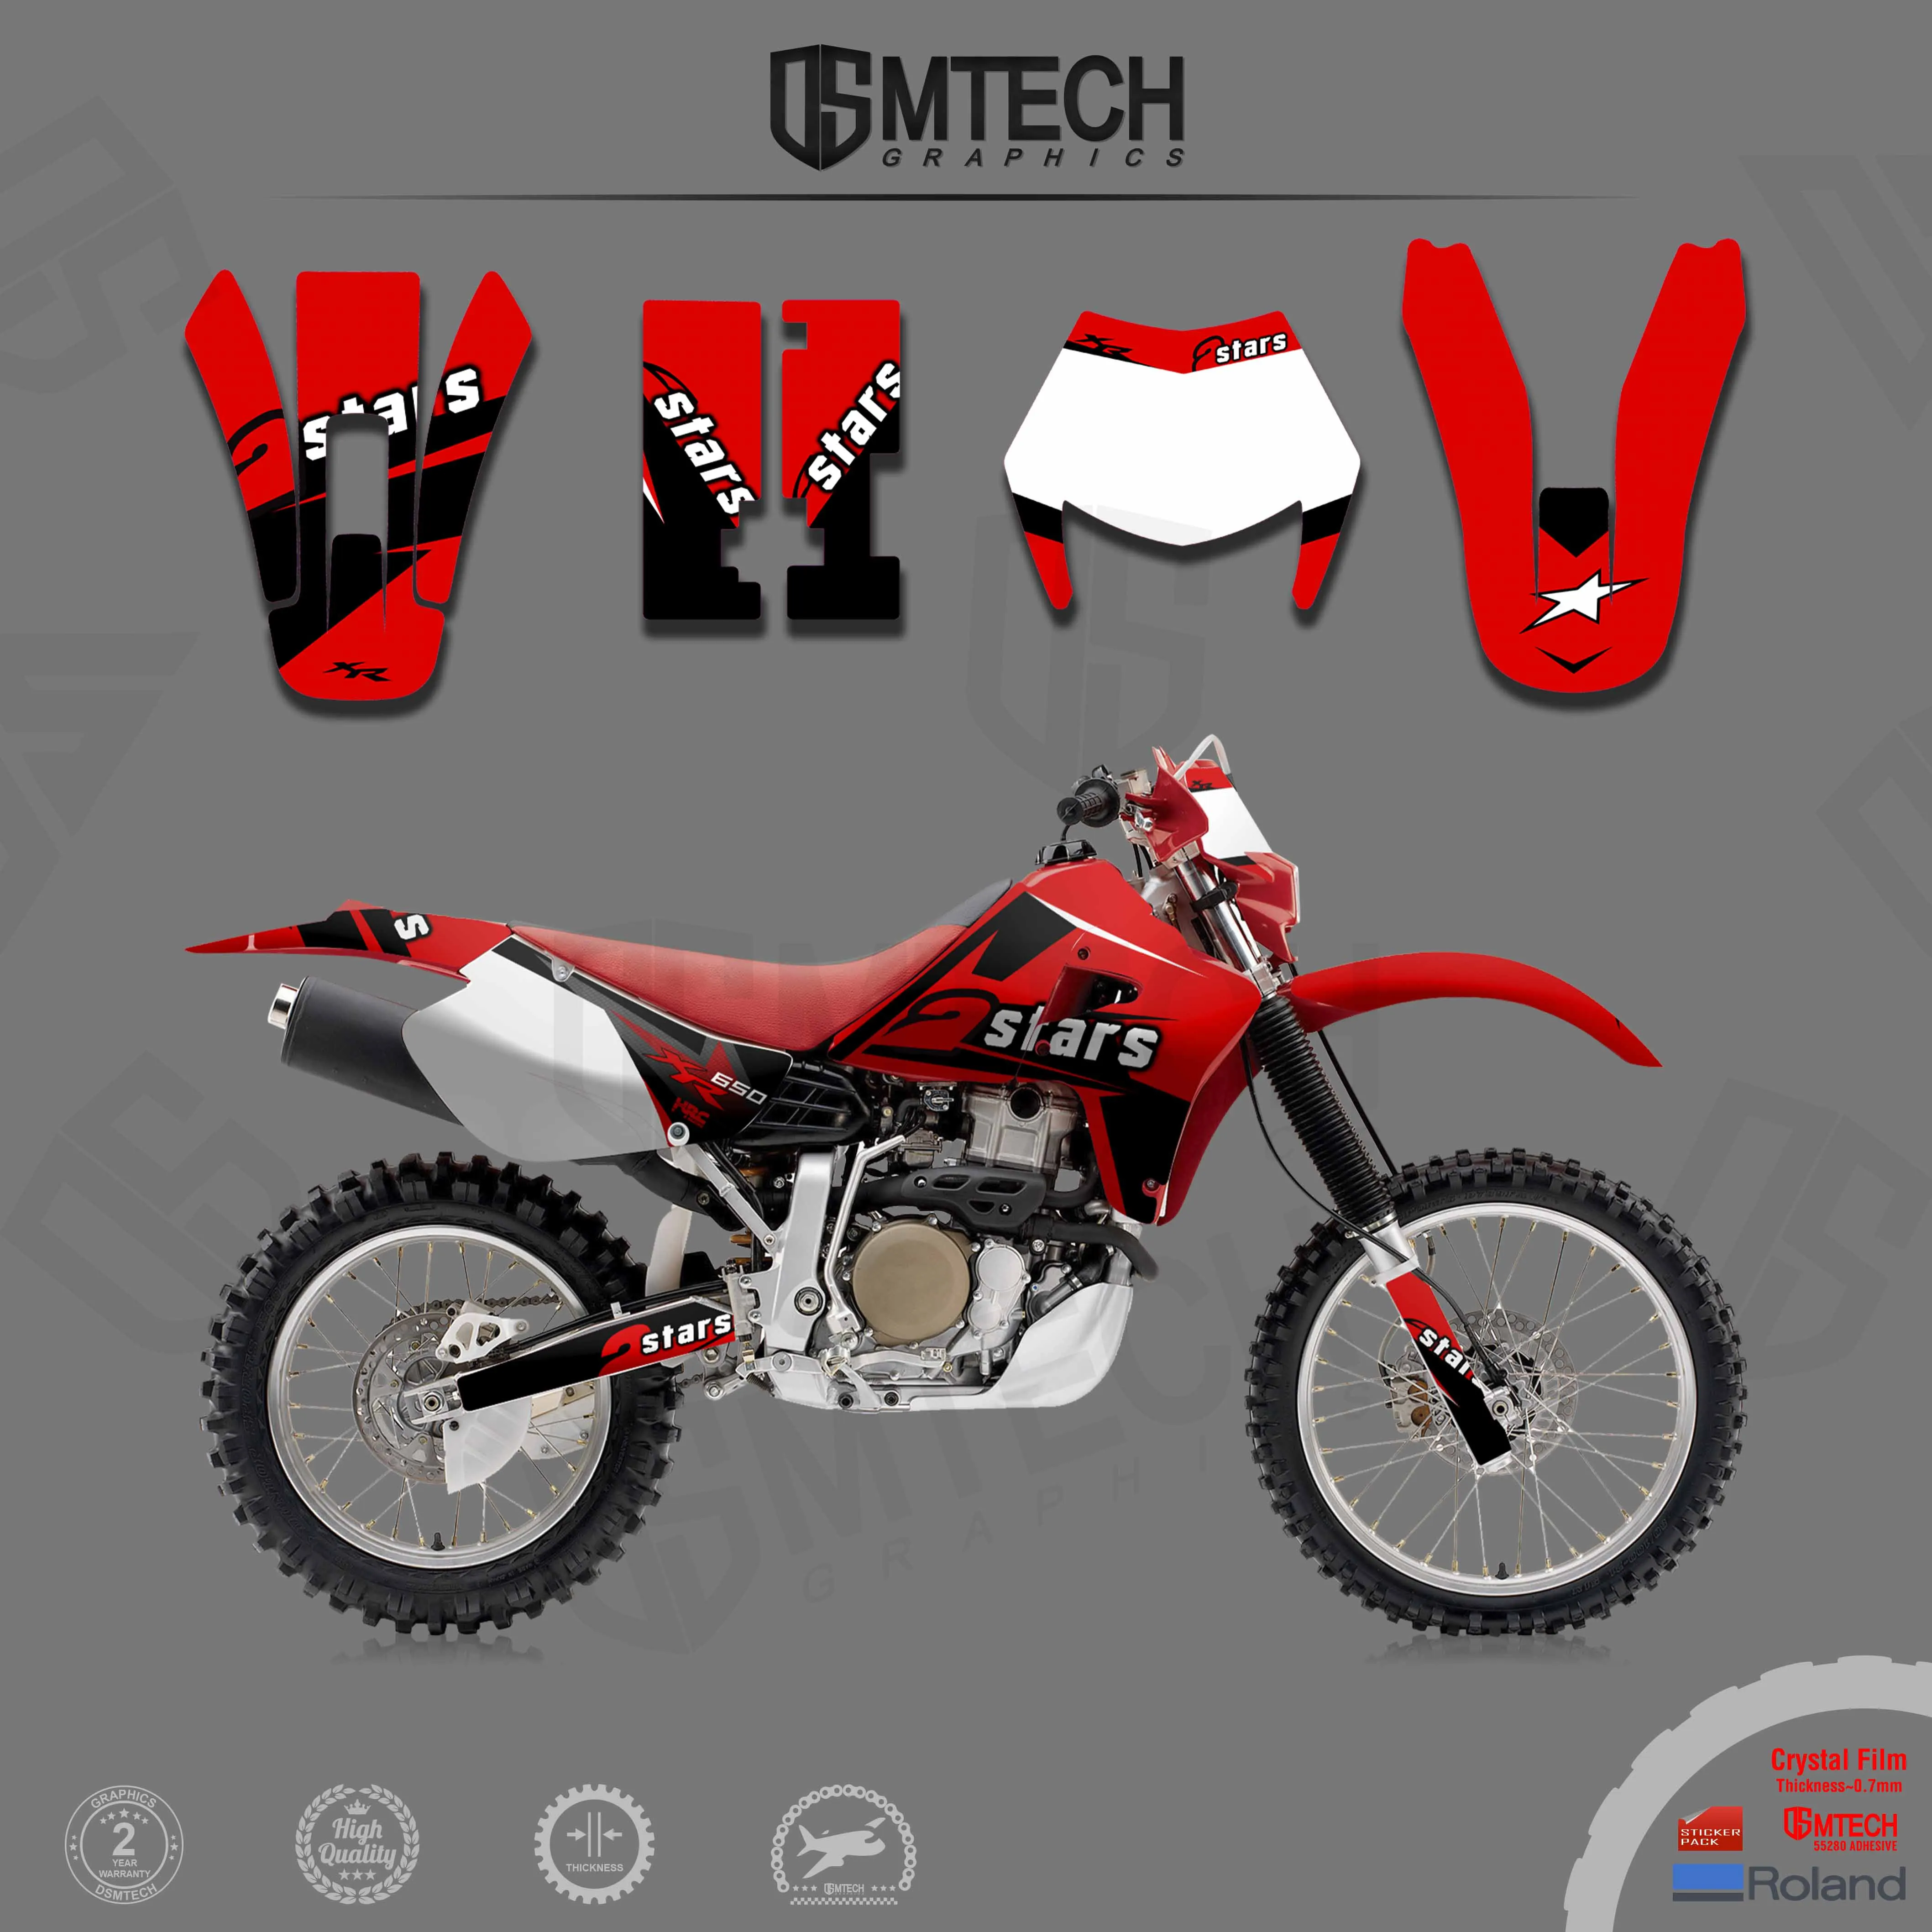 DSMTECH Stickers Motocross Backgrounds Graphics Decals  Kits  For HONDA 2000 2001 2002 2003 2004 2005 2006 2007-2009 XR650 R 002